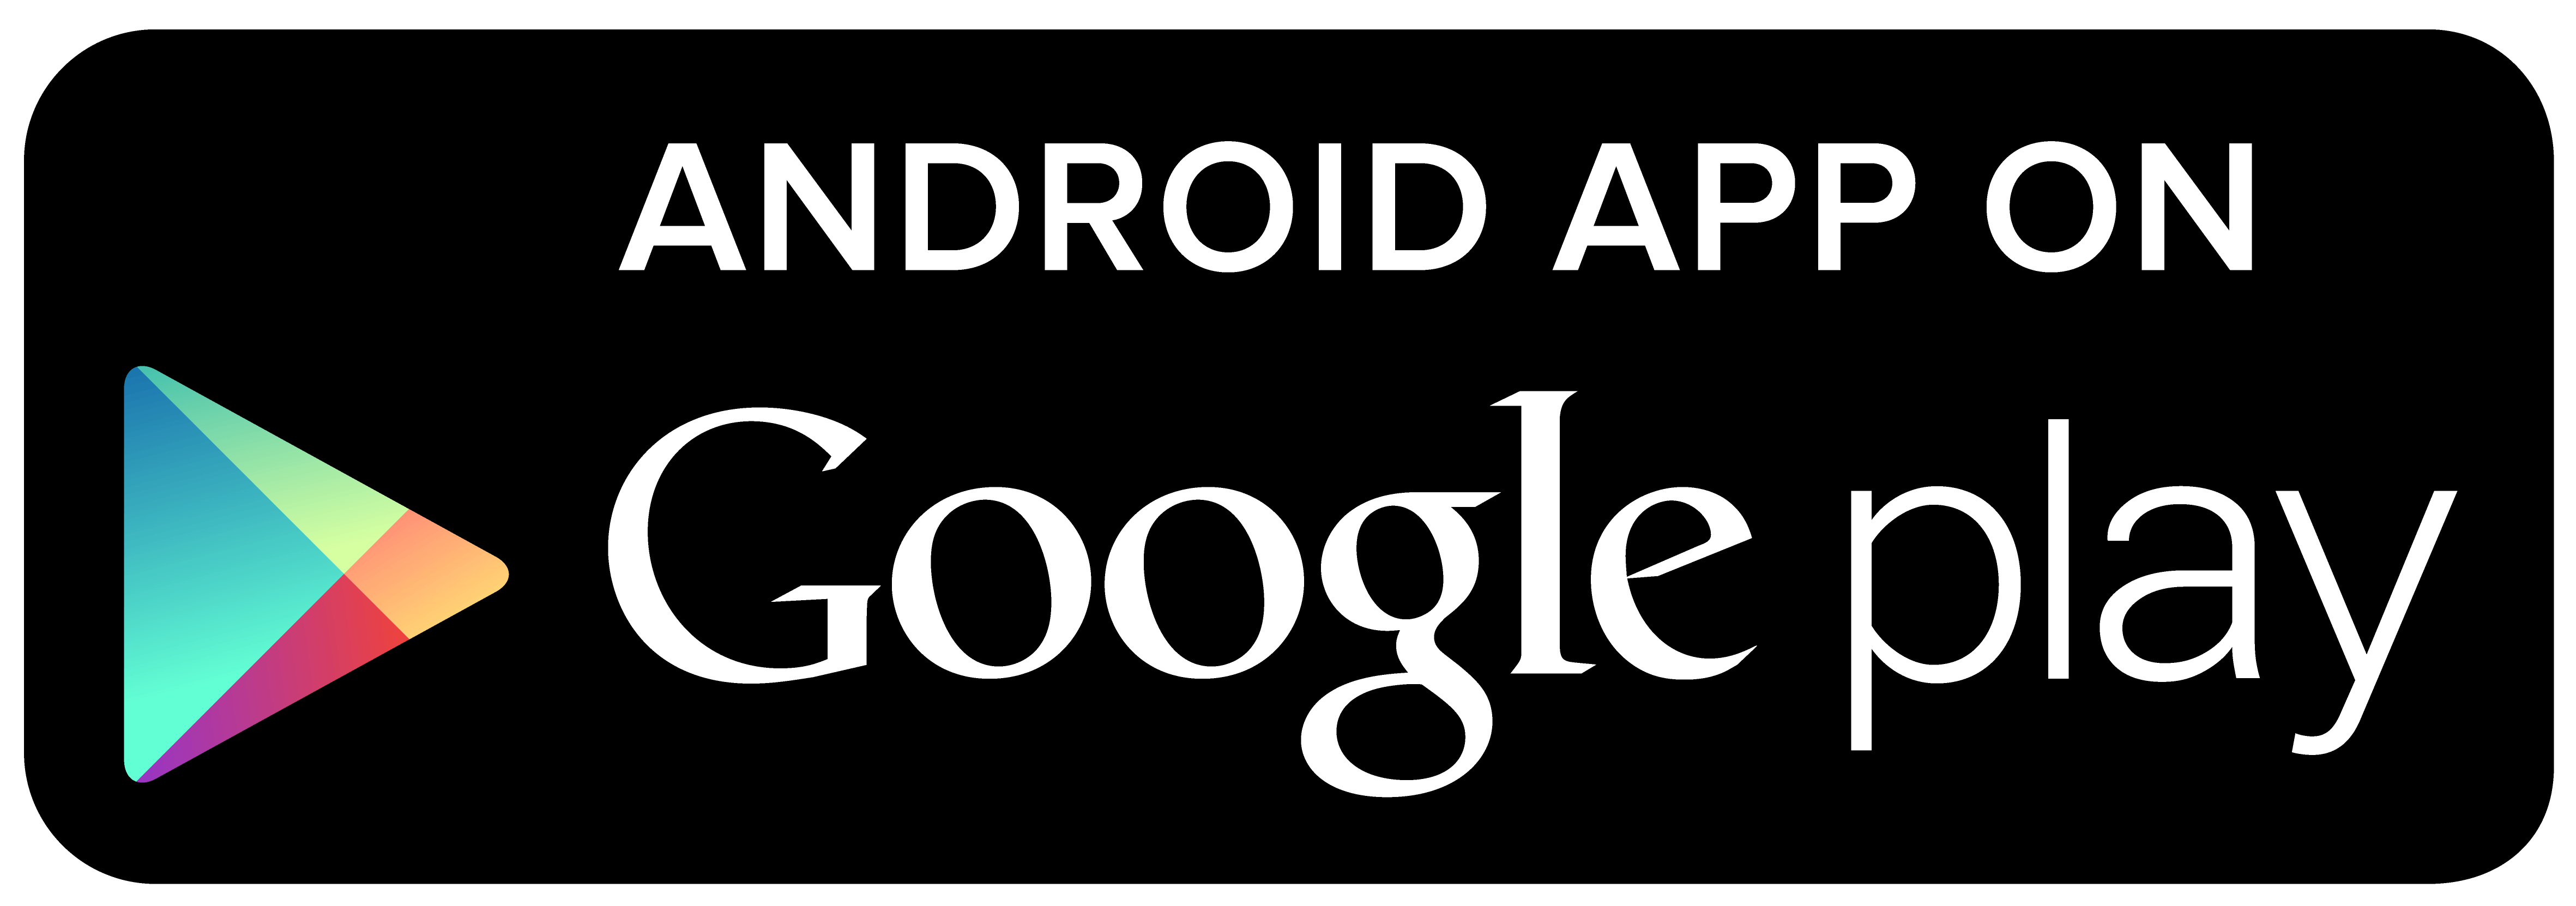 Android App Store Logo - Play Store Logo Png (93+ images in Collection) Page 1